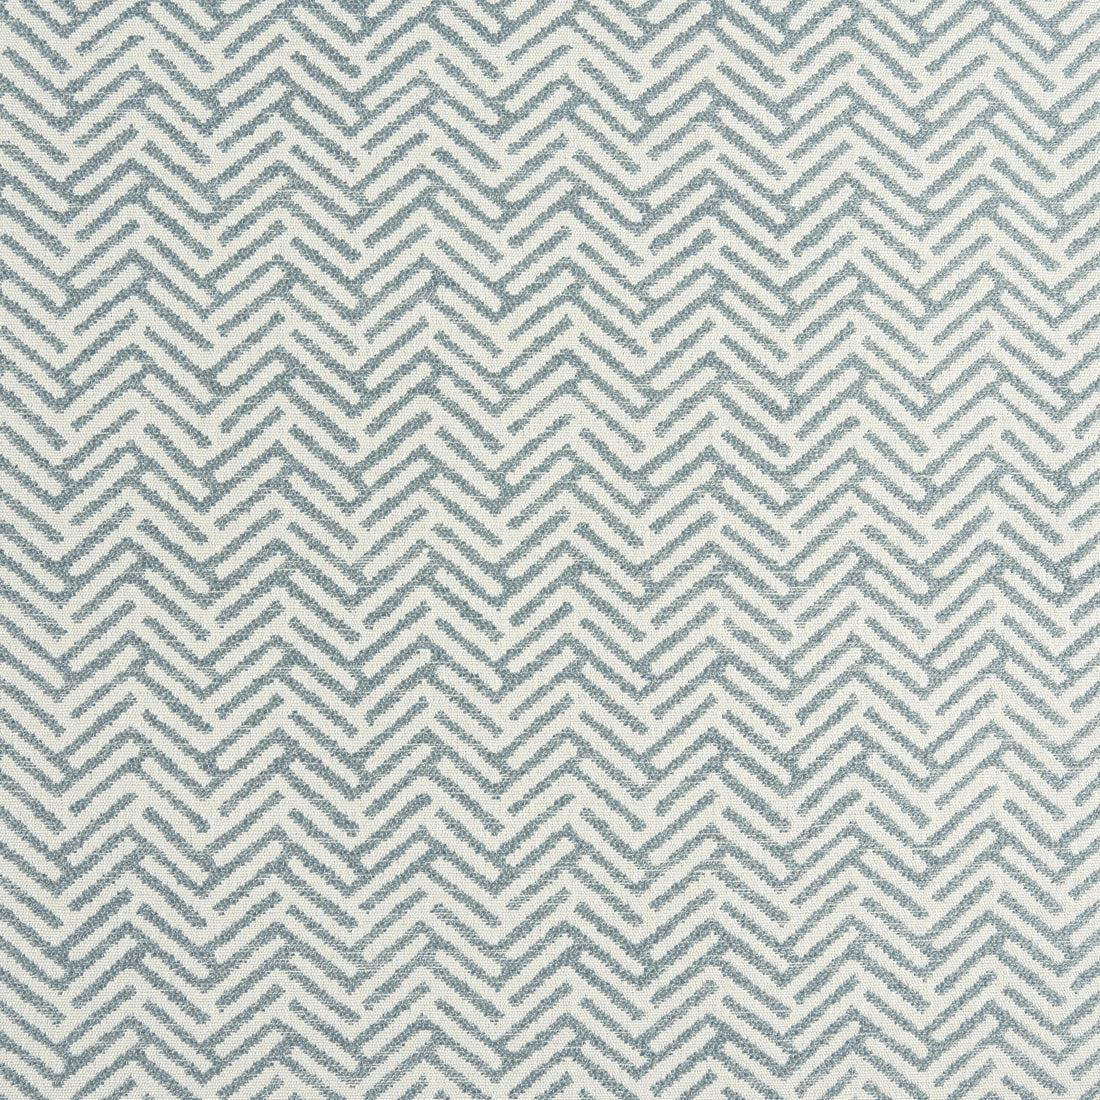 Varenna fabric in fog color - pattern number W8110 - by Thibaut in the Sereno collection